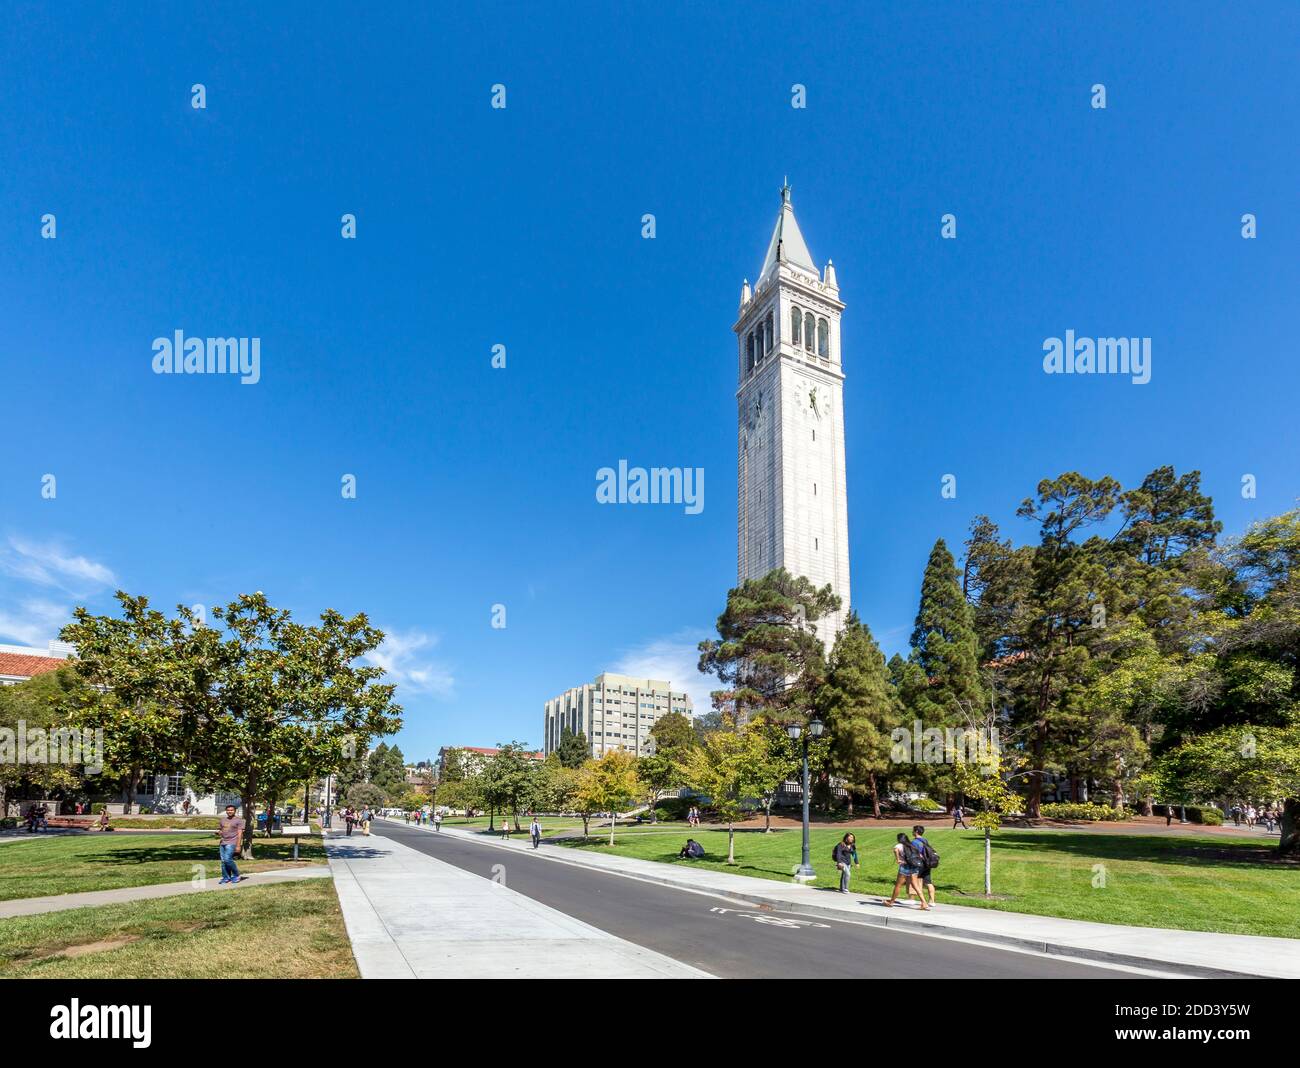 Campus  of the University of California at Berkeley, California. The Sather Tower, which rises 307 feet (94 meters) and was completed in 1915. Stock Photo